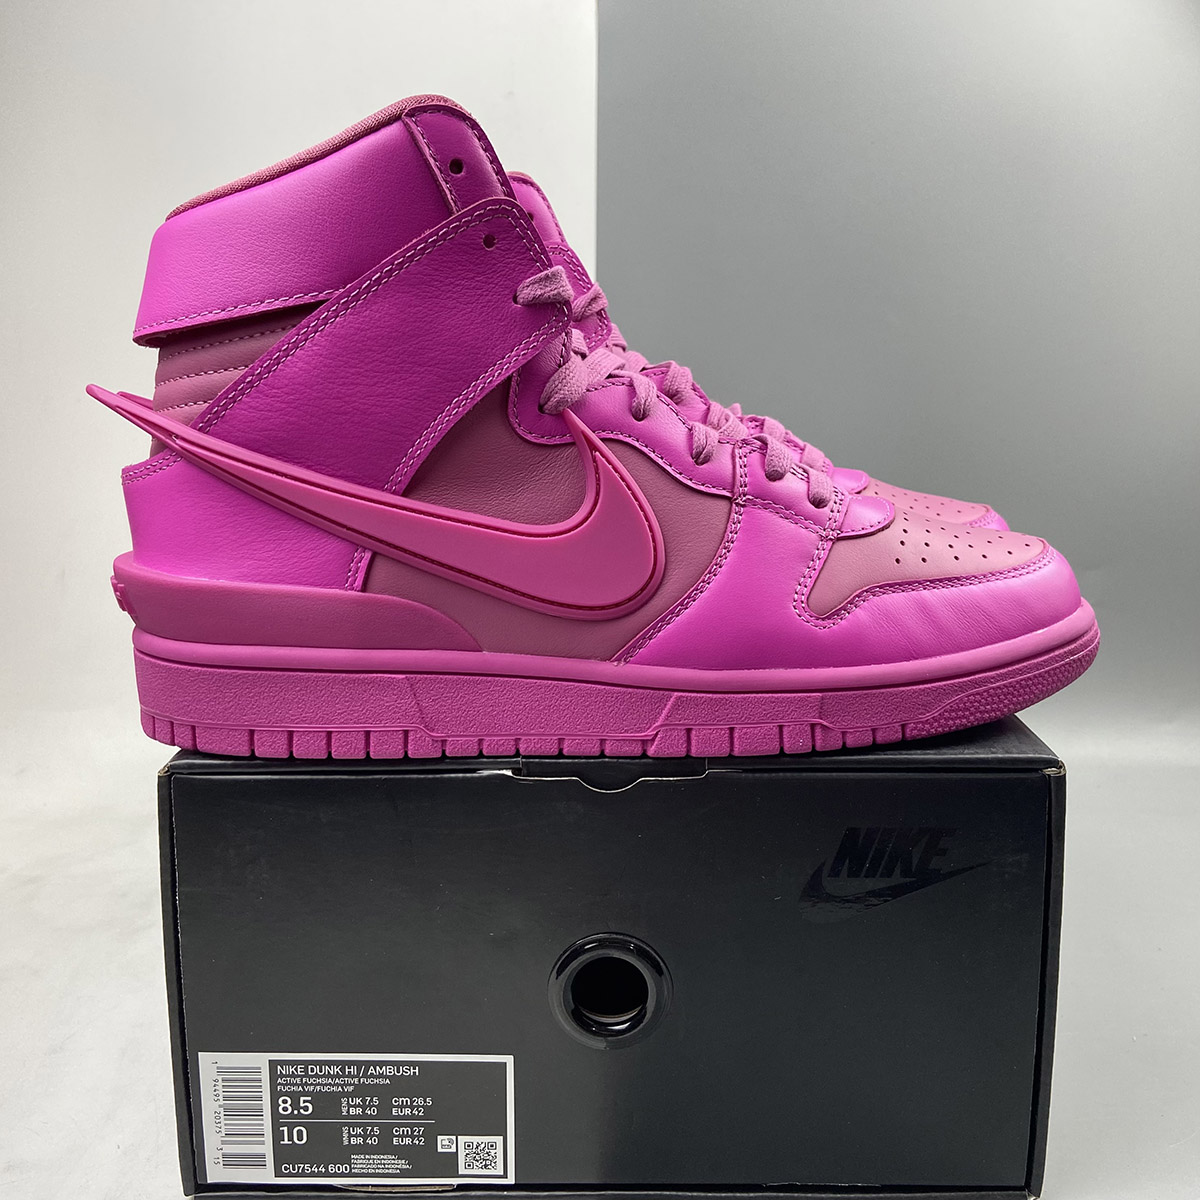 Ambush x Nike Dunk High Active Fuchsia/Lethal Pink For Sale – The Sole Line